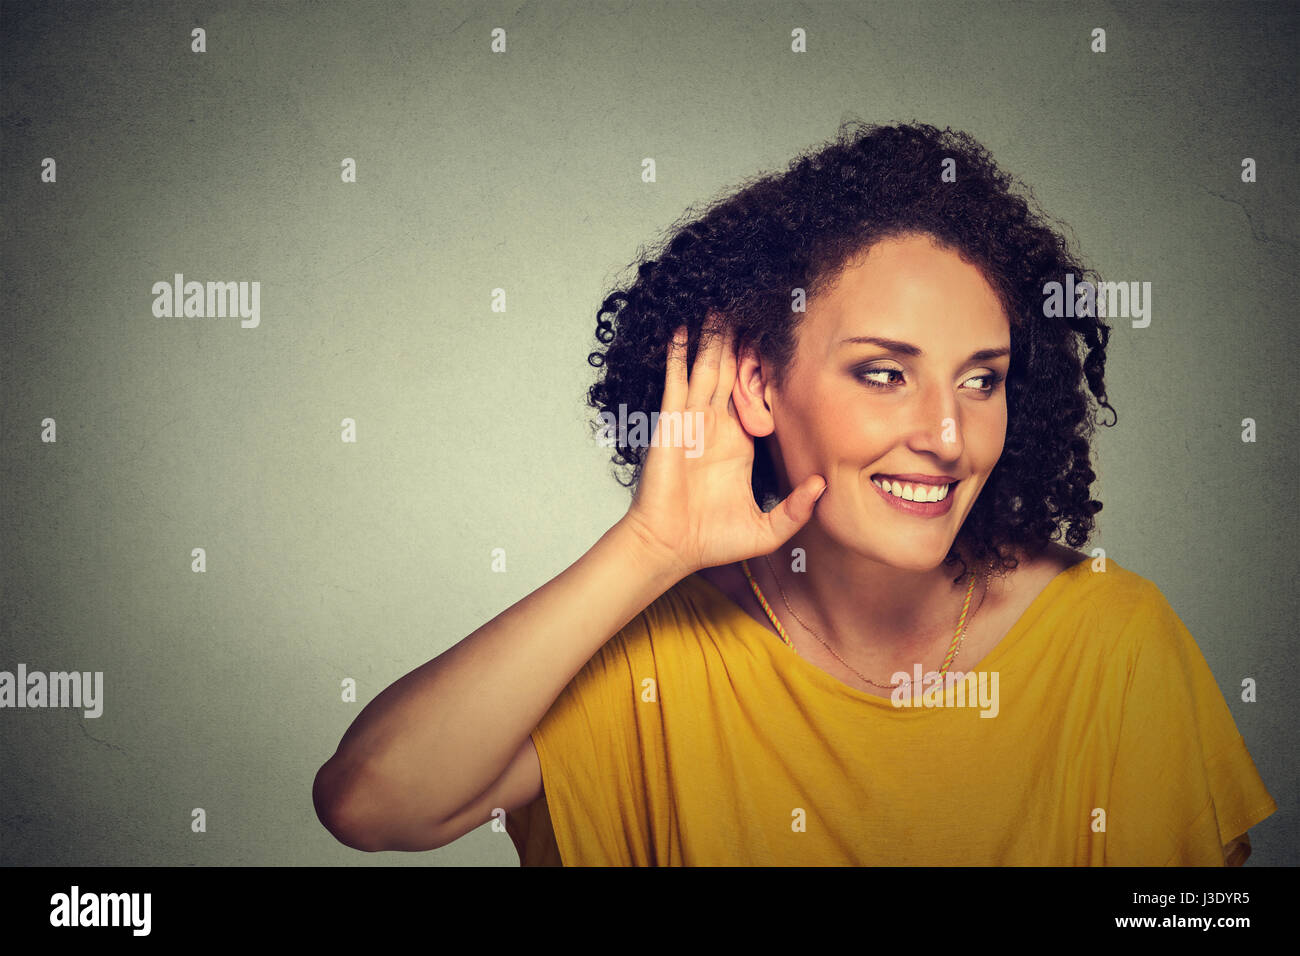 Closeup portrait happy middle aged nosy woman hand to ear gesture carefully secretly listening juicy gossip conversation privacy violation isolated on Stock Photo